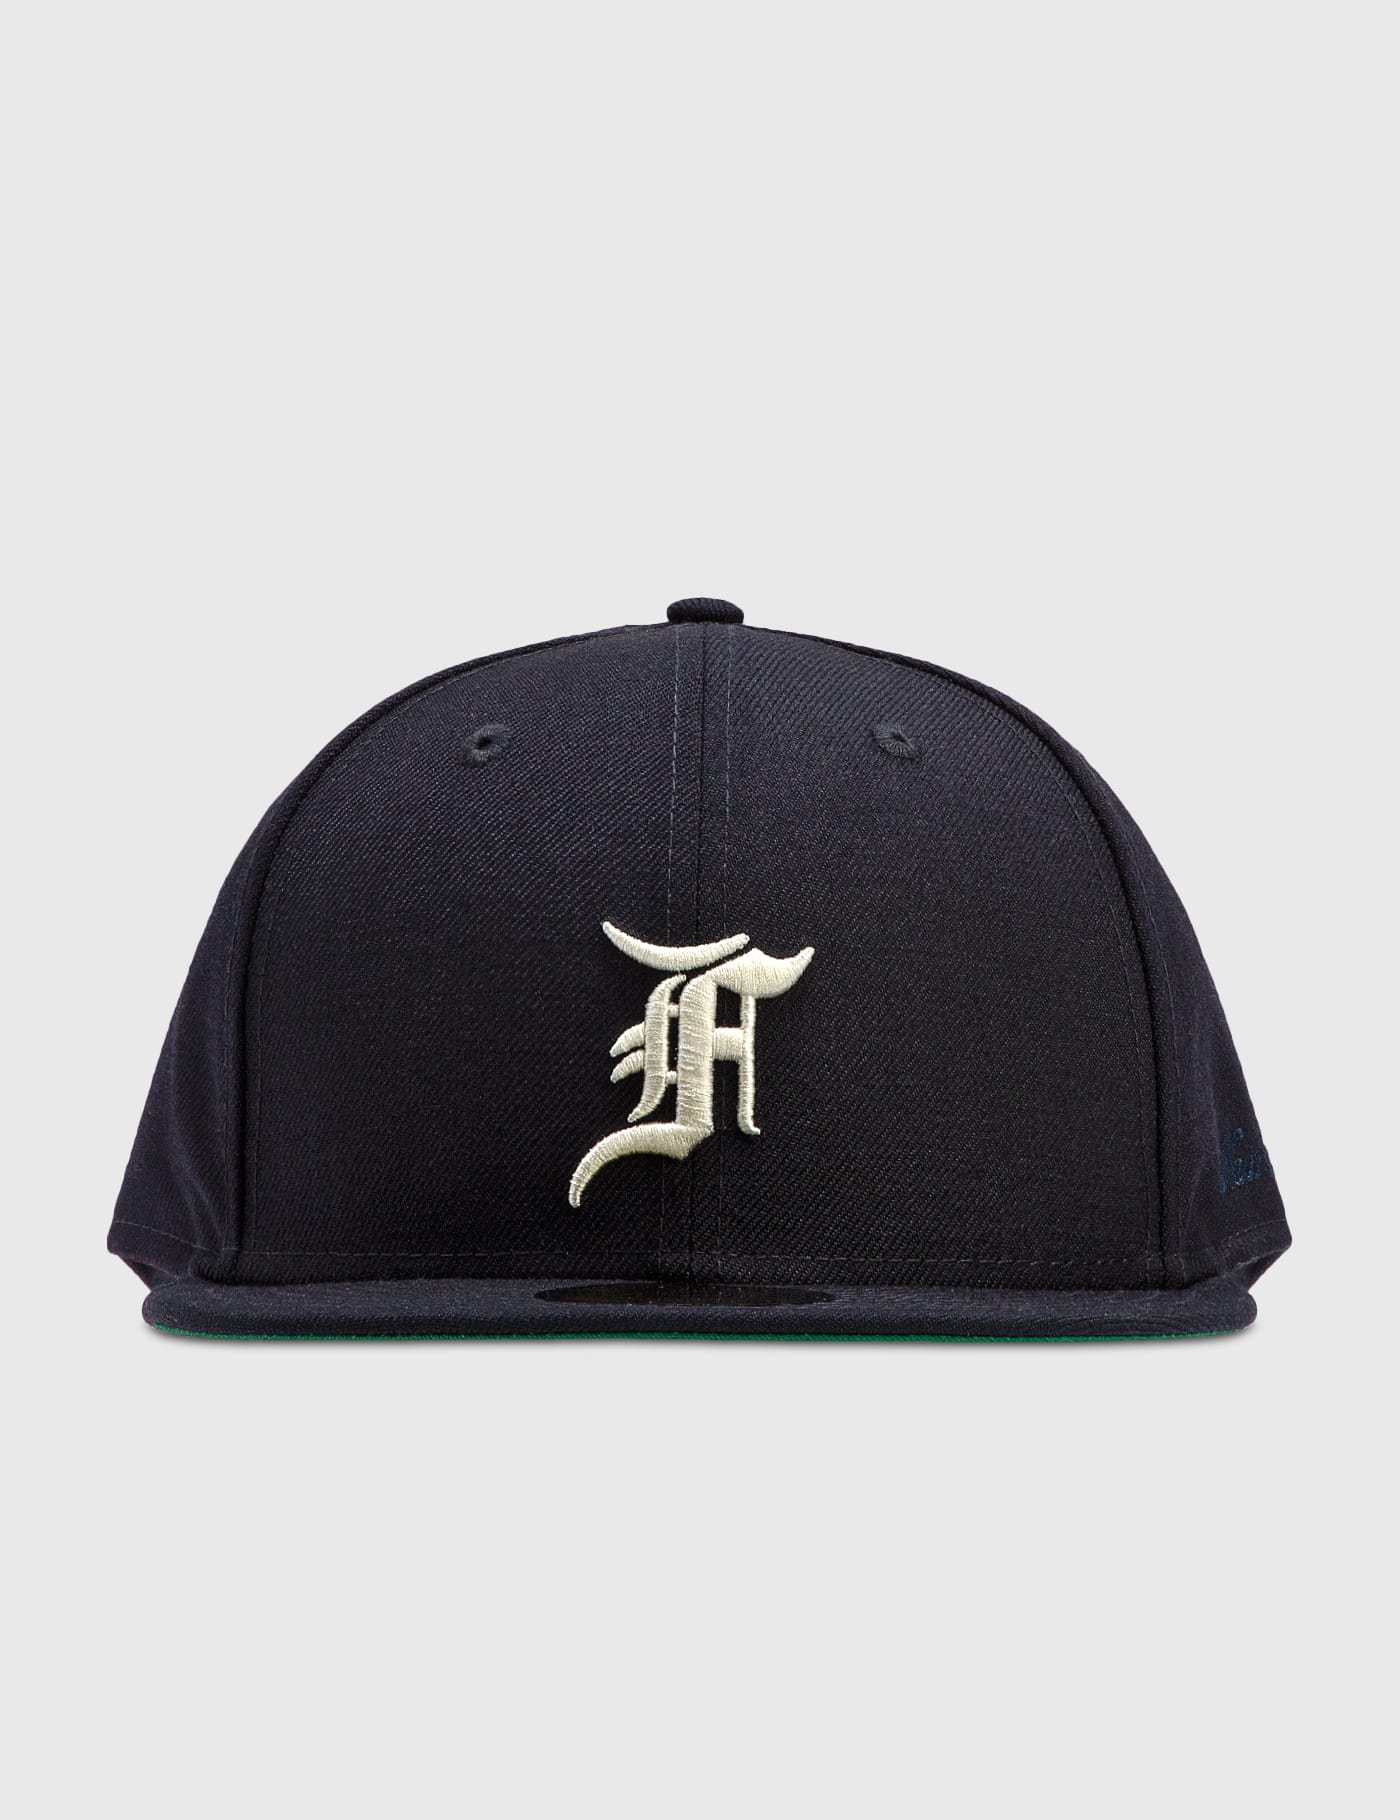 New Era x Fear of God 59FIFTY Fitted Cap